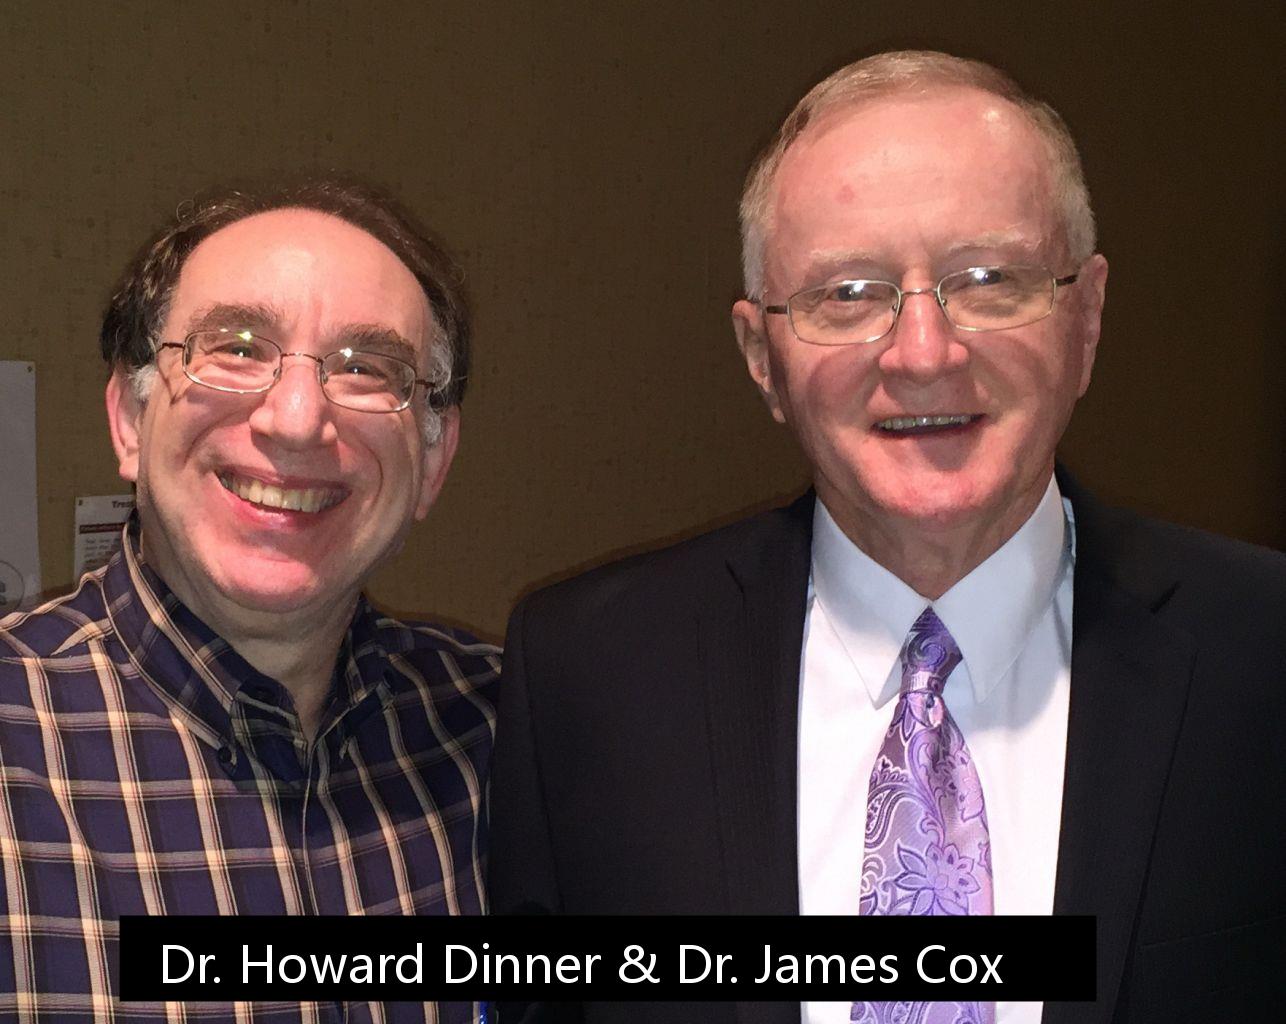 Dr. Howard Dinner and Dr. James Cox